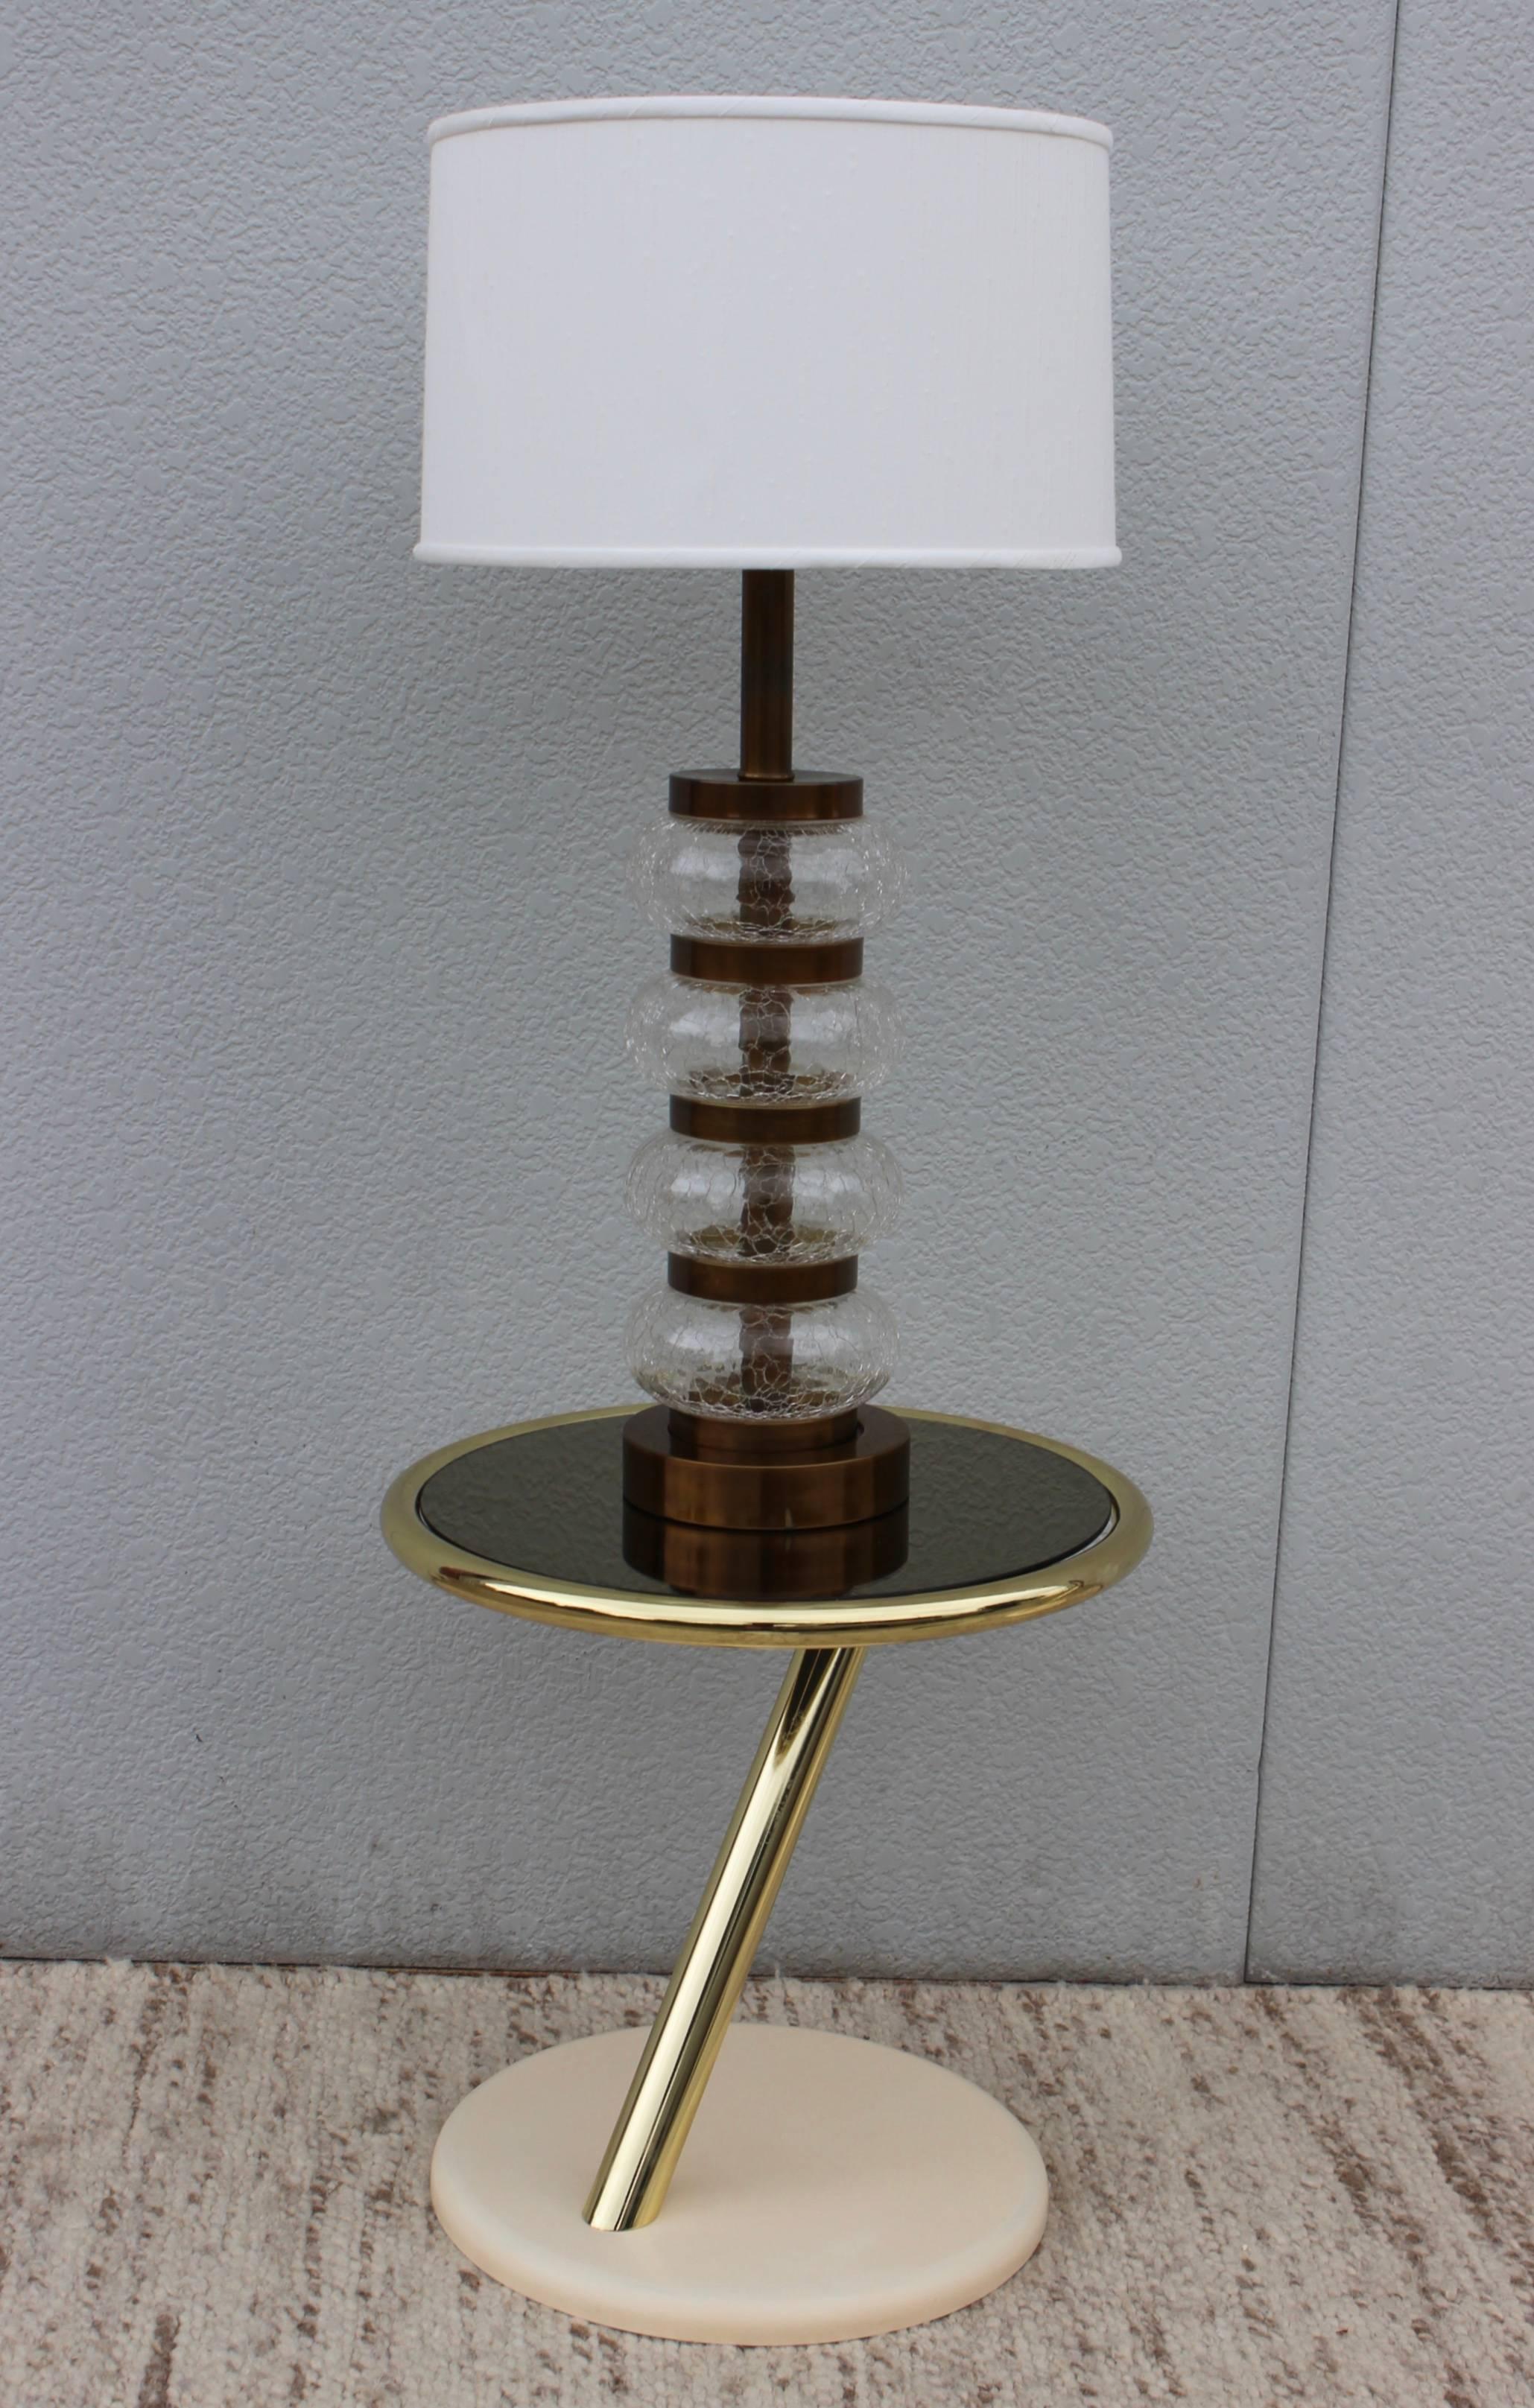 1950s crackled glass and brass with glass diffuser table lamp by Paul Hansen.

Shade for photography only.